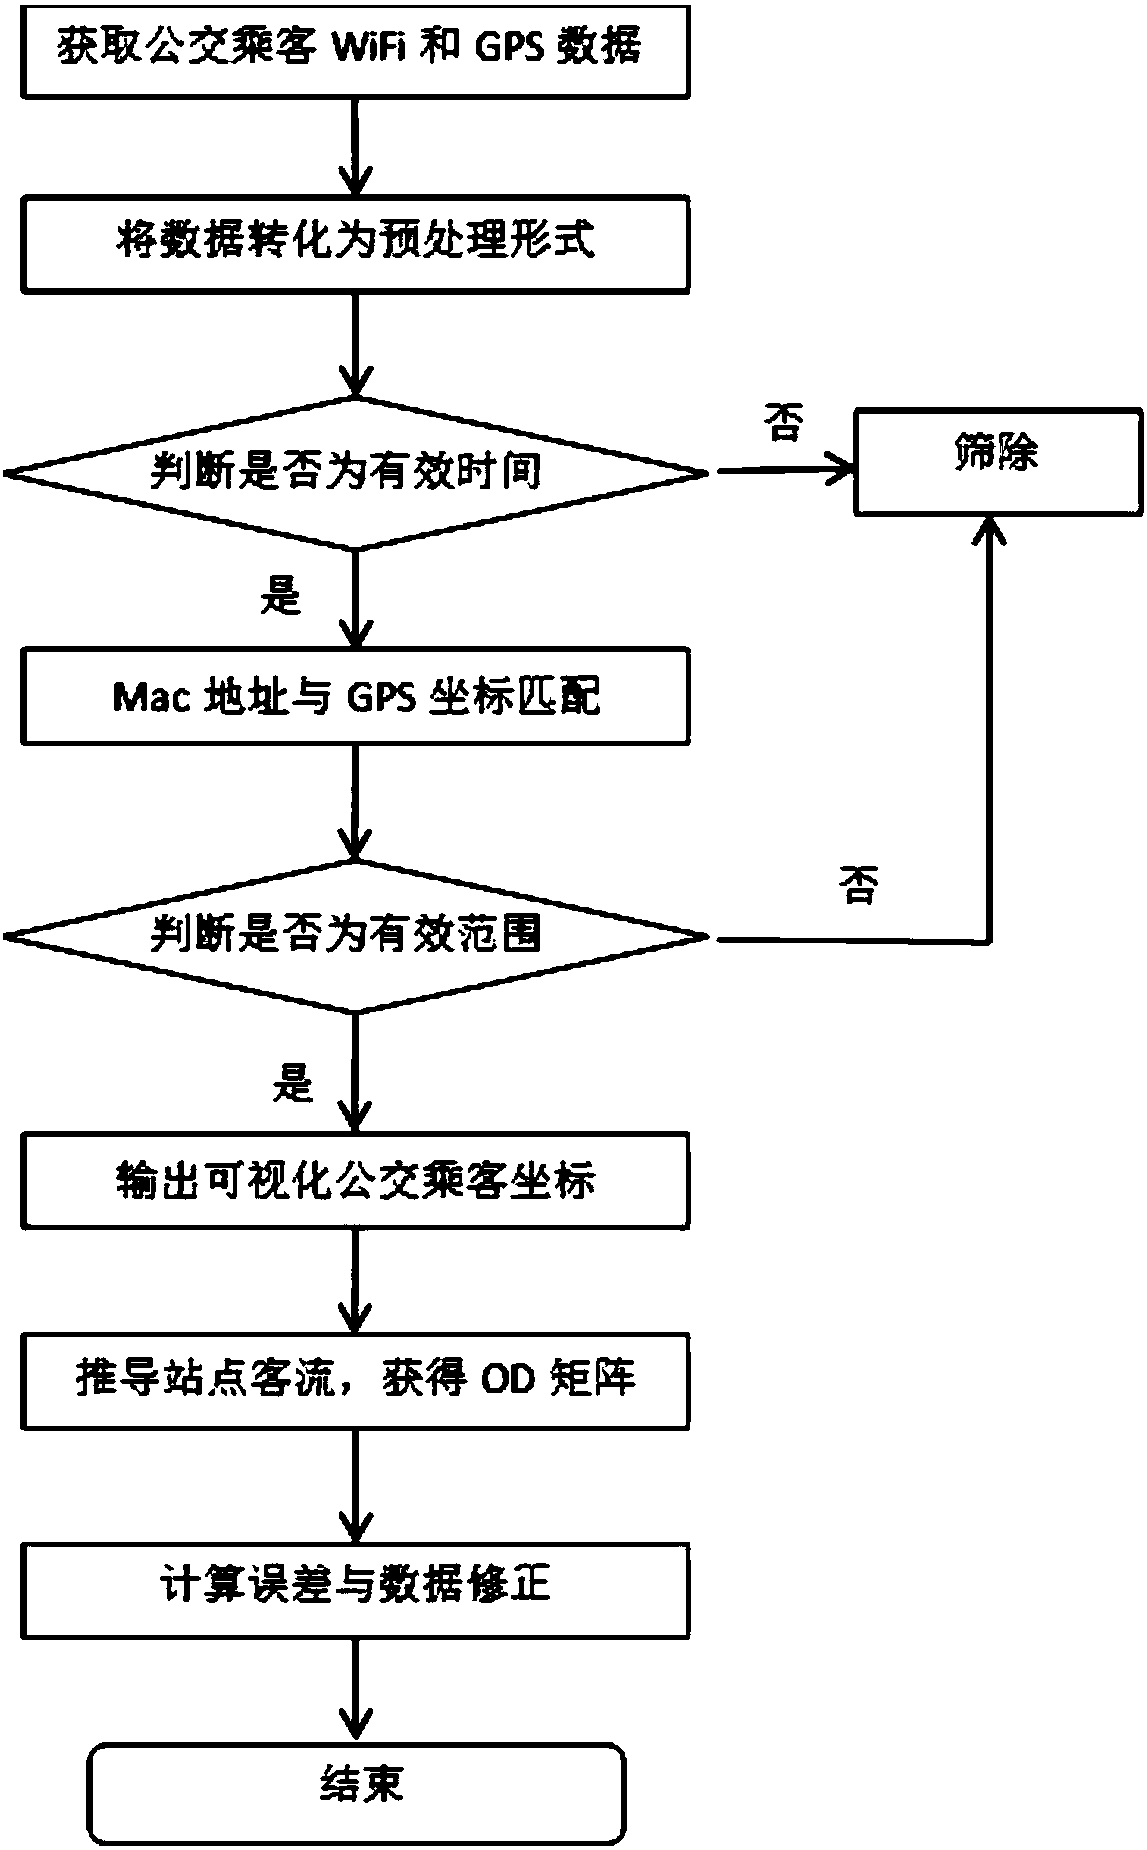 Bus route passenger flow OD estimation method based on WiFi and Bluetooth recognition